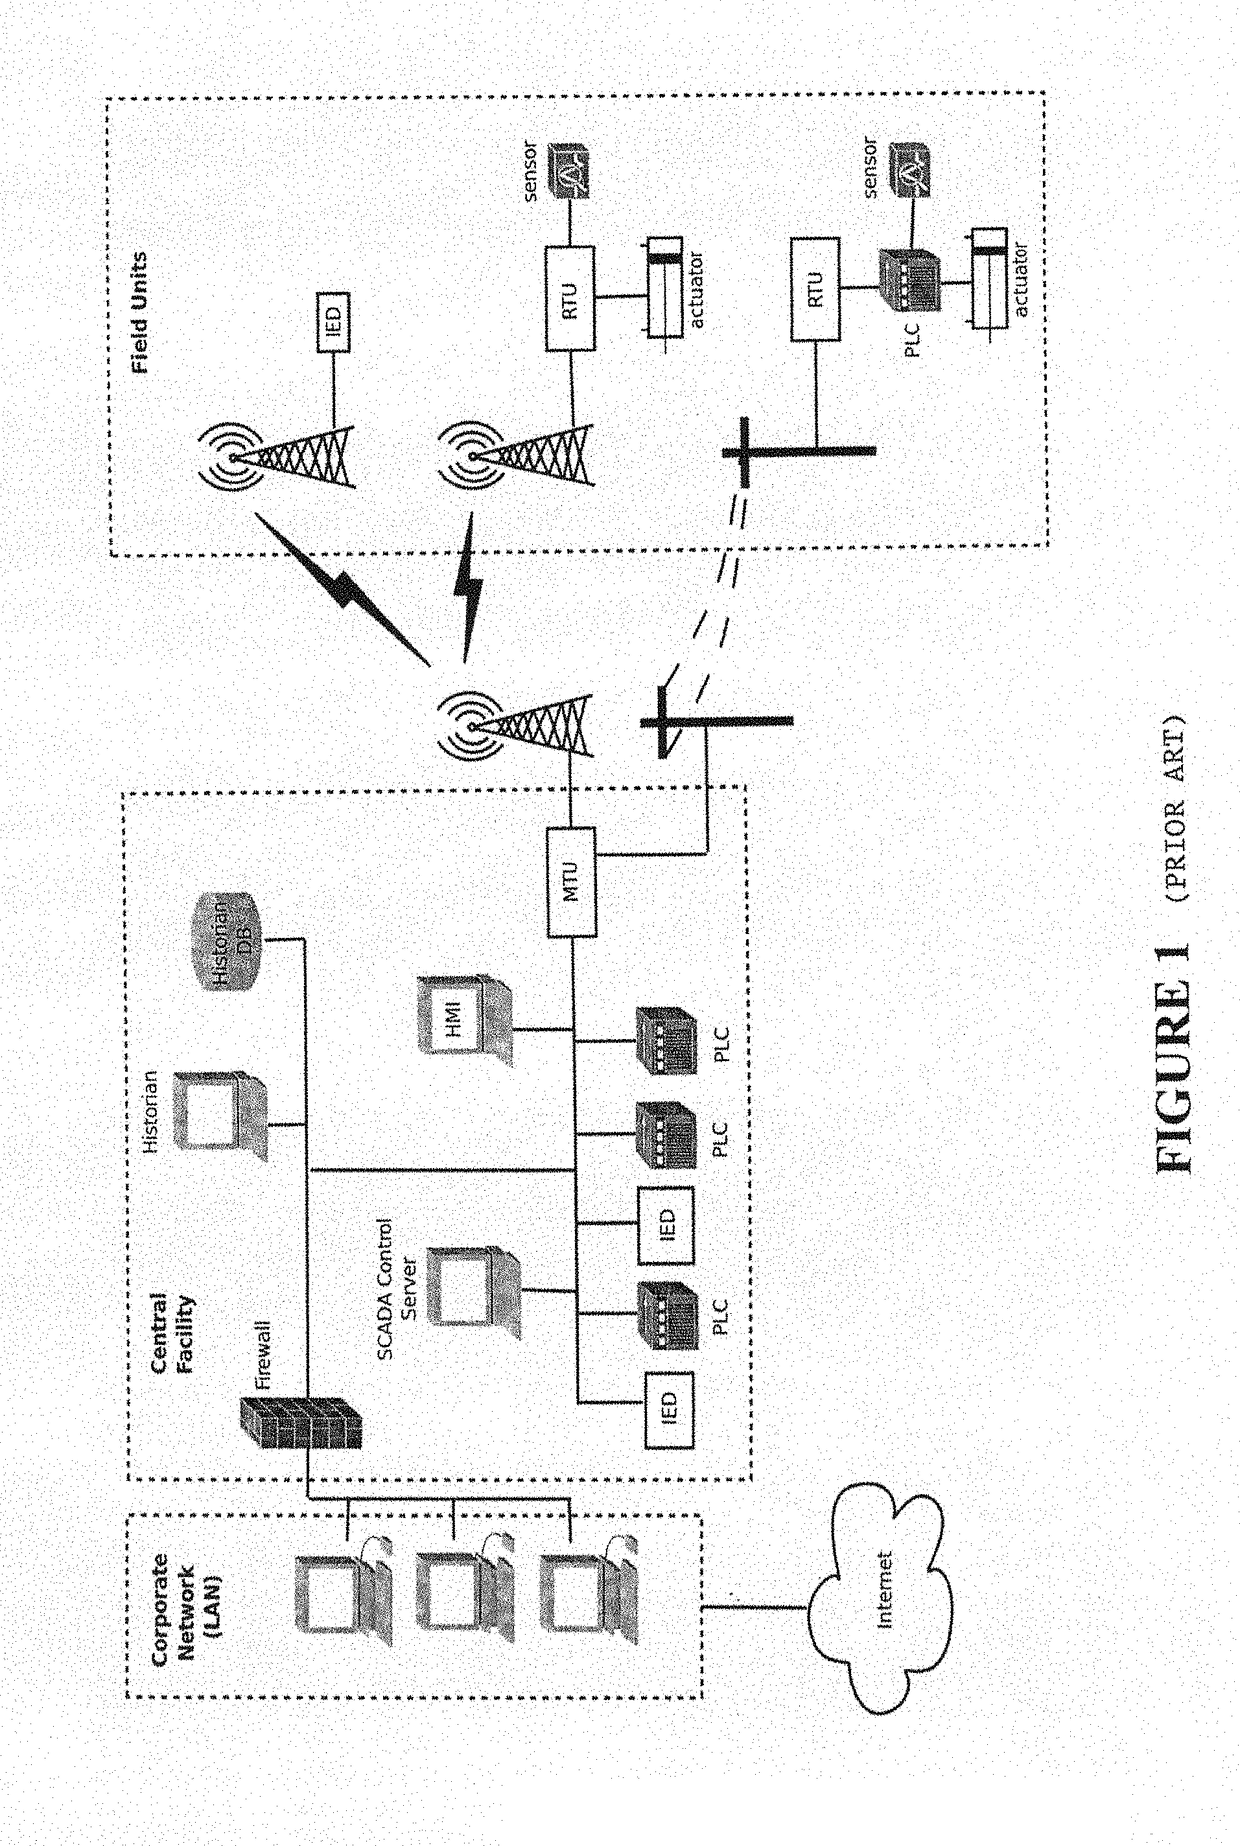 Method and System for Discovery and Mapping of a Network Topology